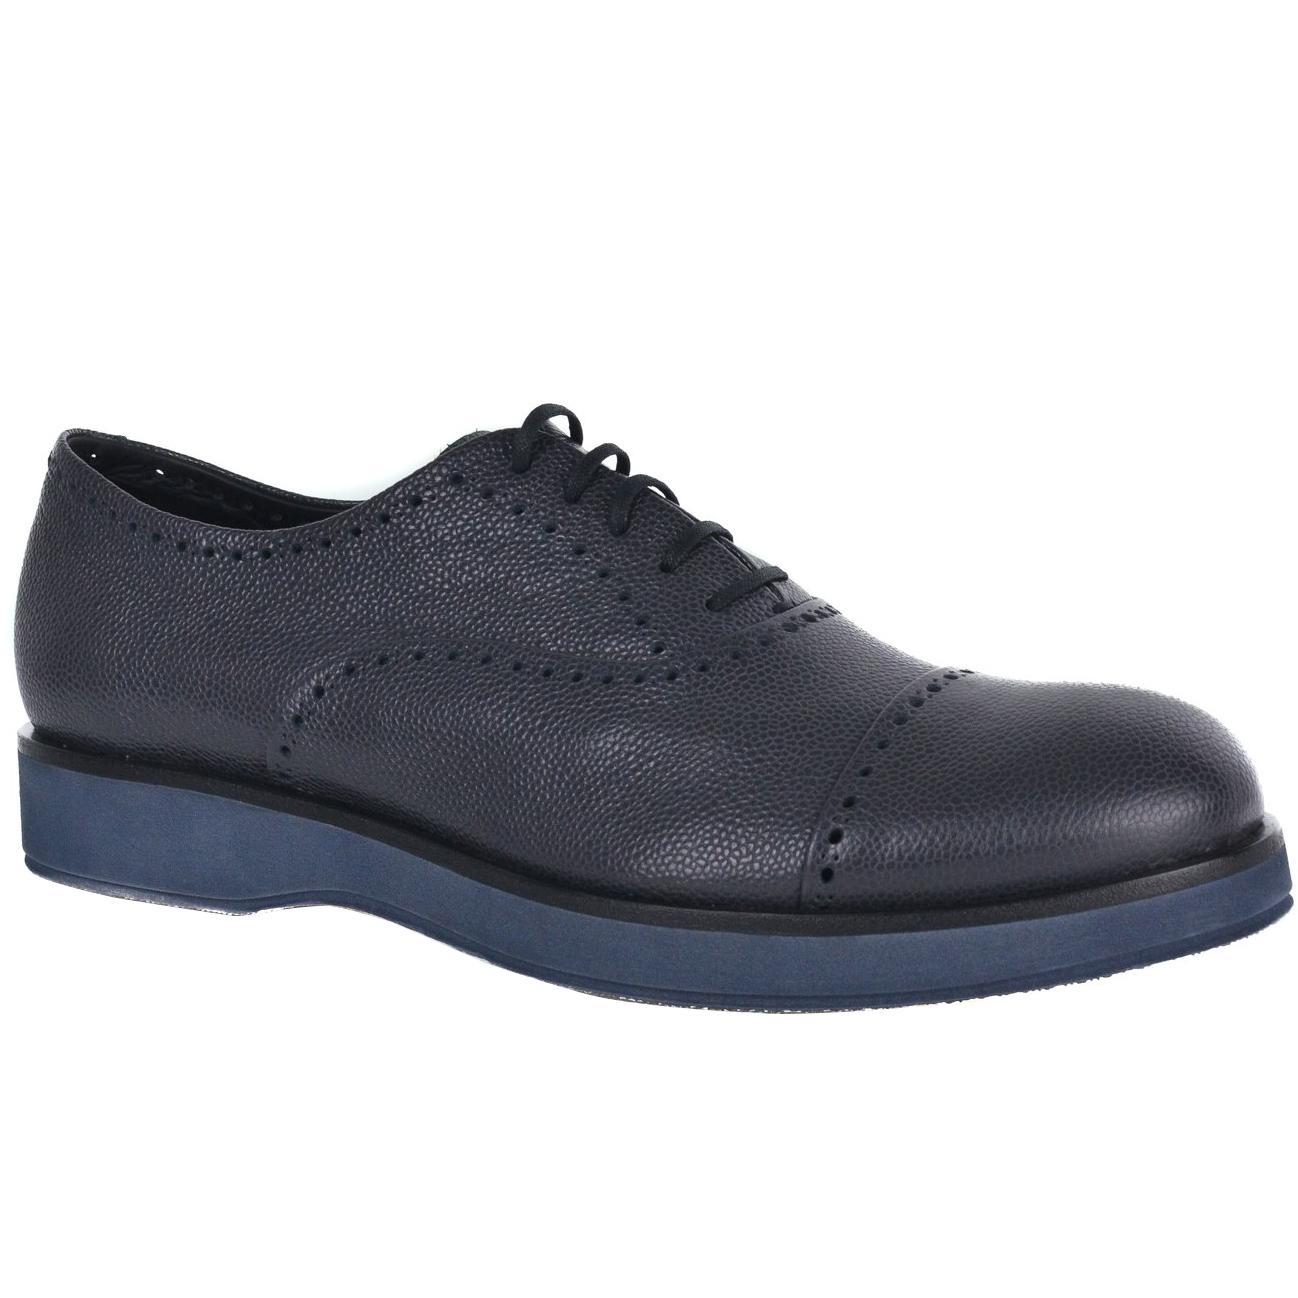 Giorgio Armani Mens Dark Grey Leather Perforated Oxfords Shoes For Sale